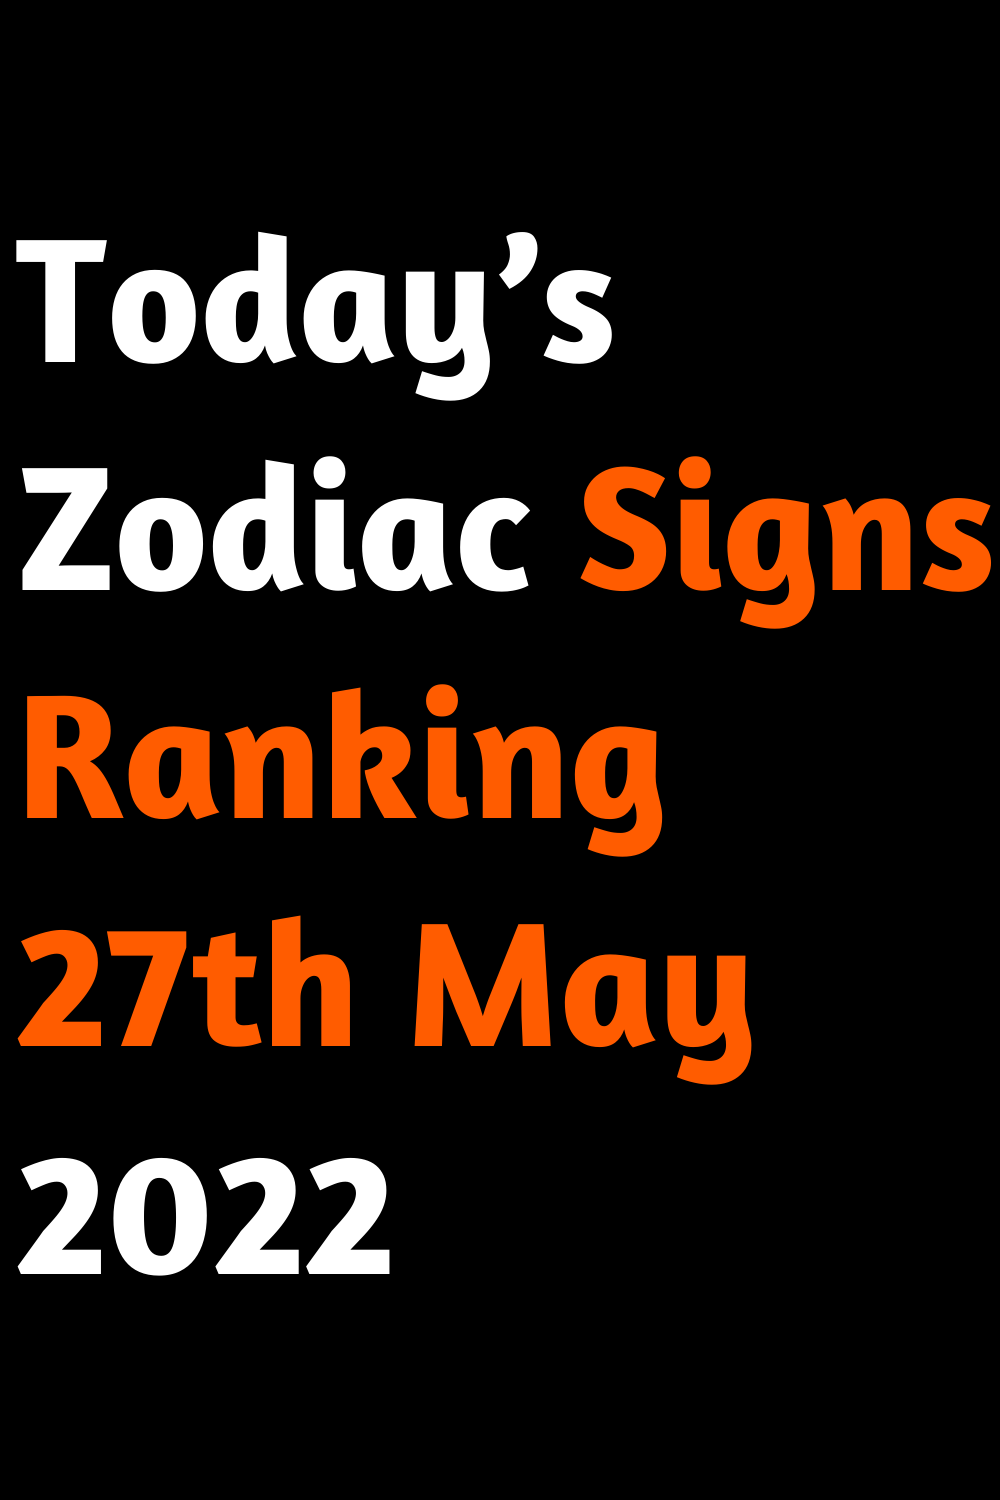 Today’s Zodiac Signs Ranking 27th May 2022